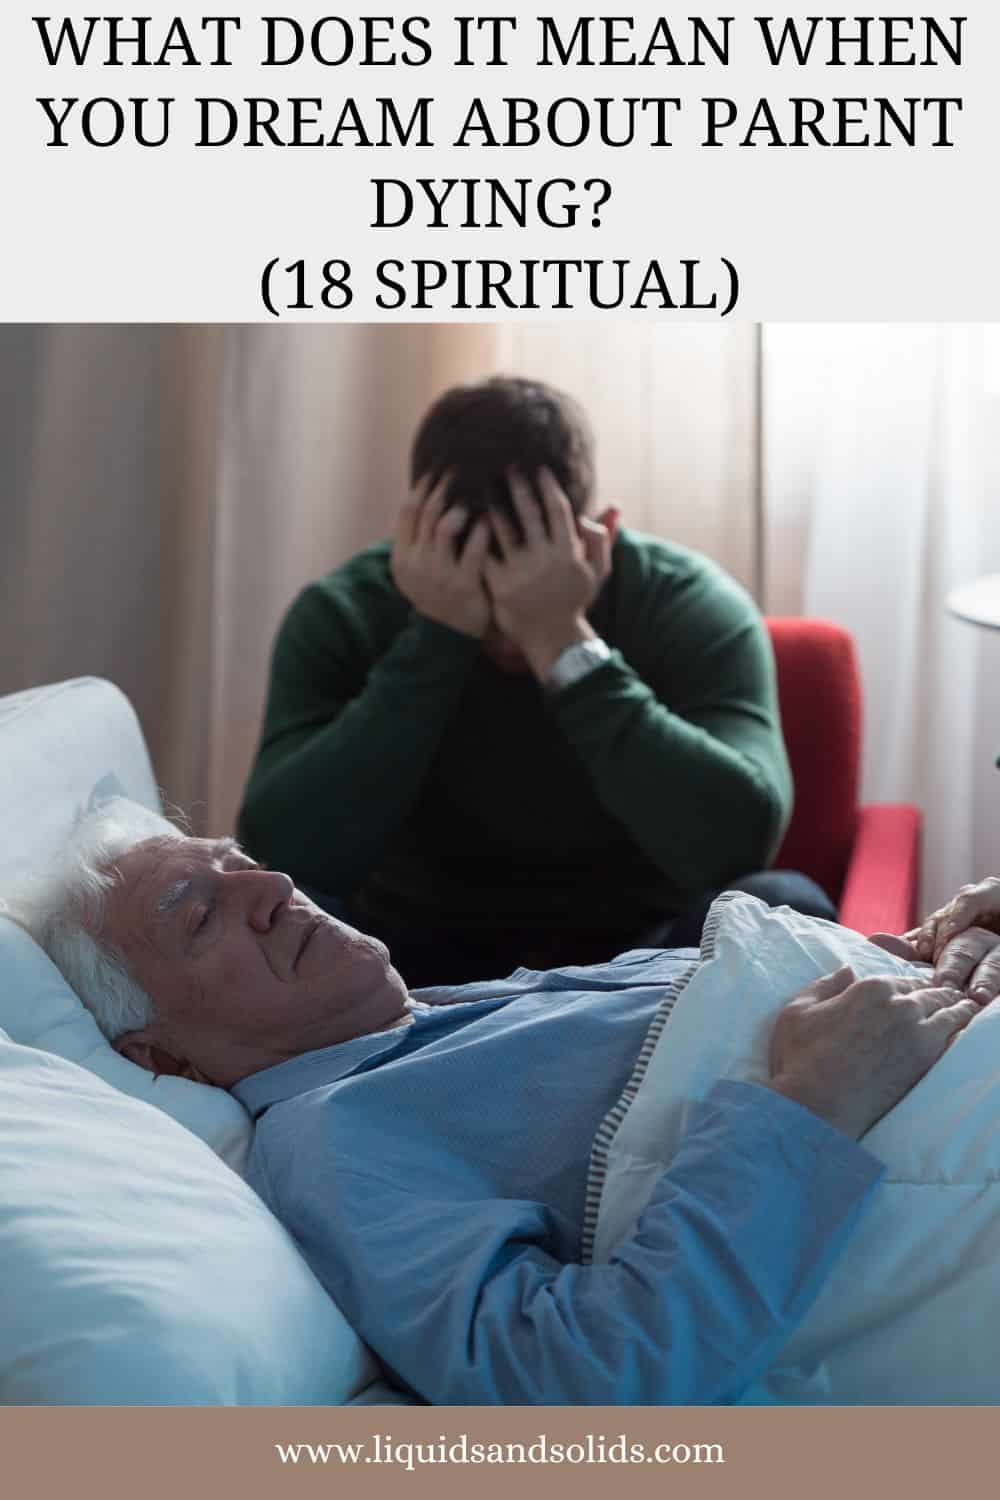 What Does It Mean When You Dream About Parent Dying? (18 Spiritual)